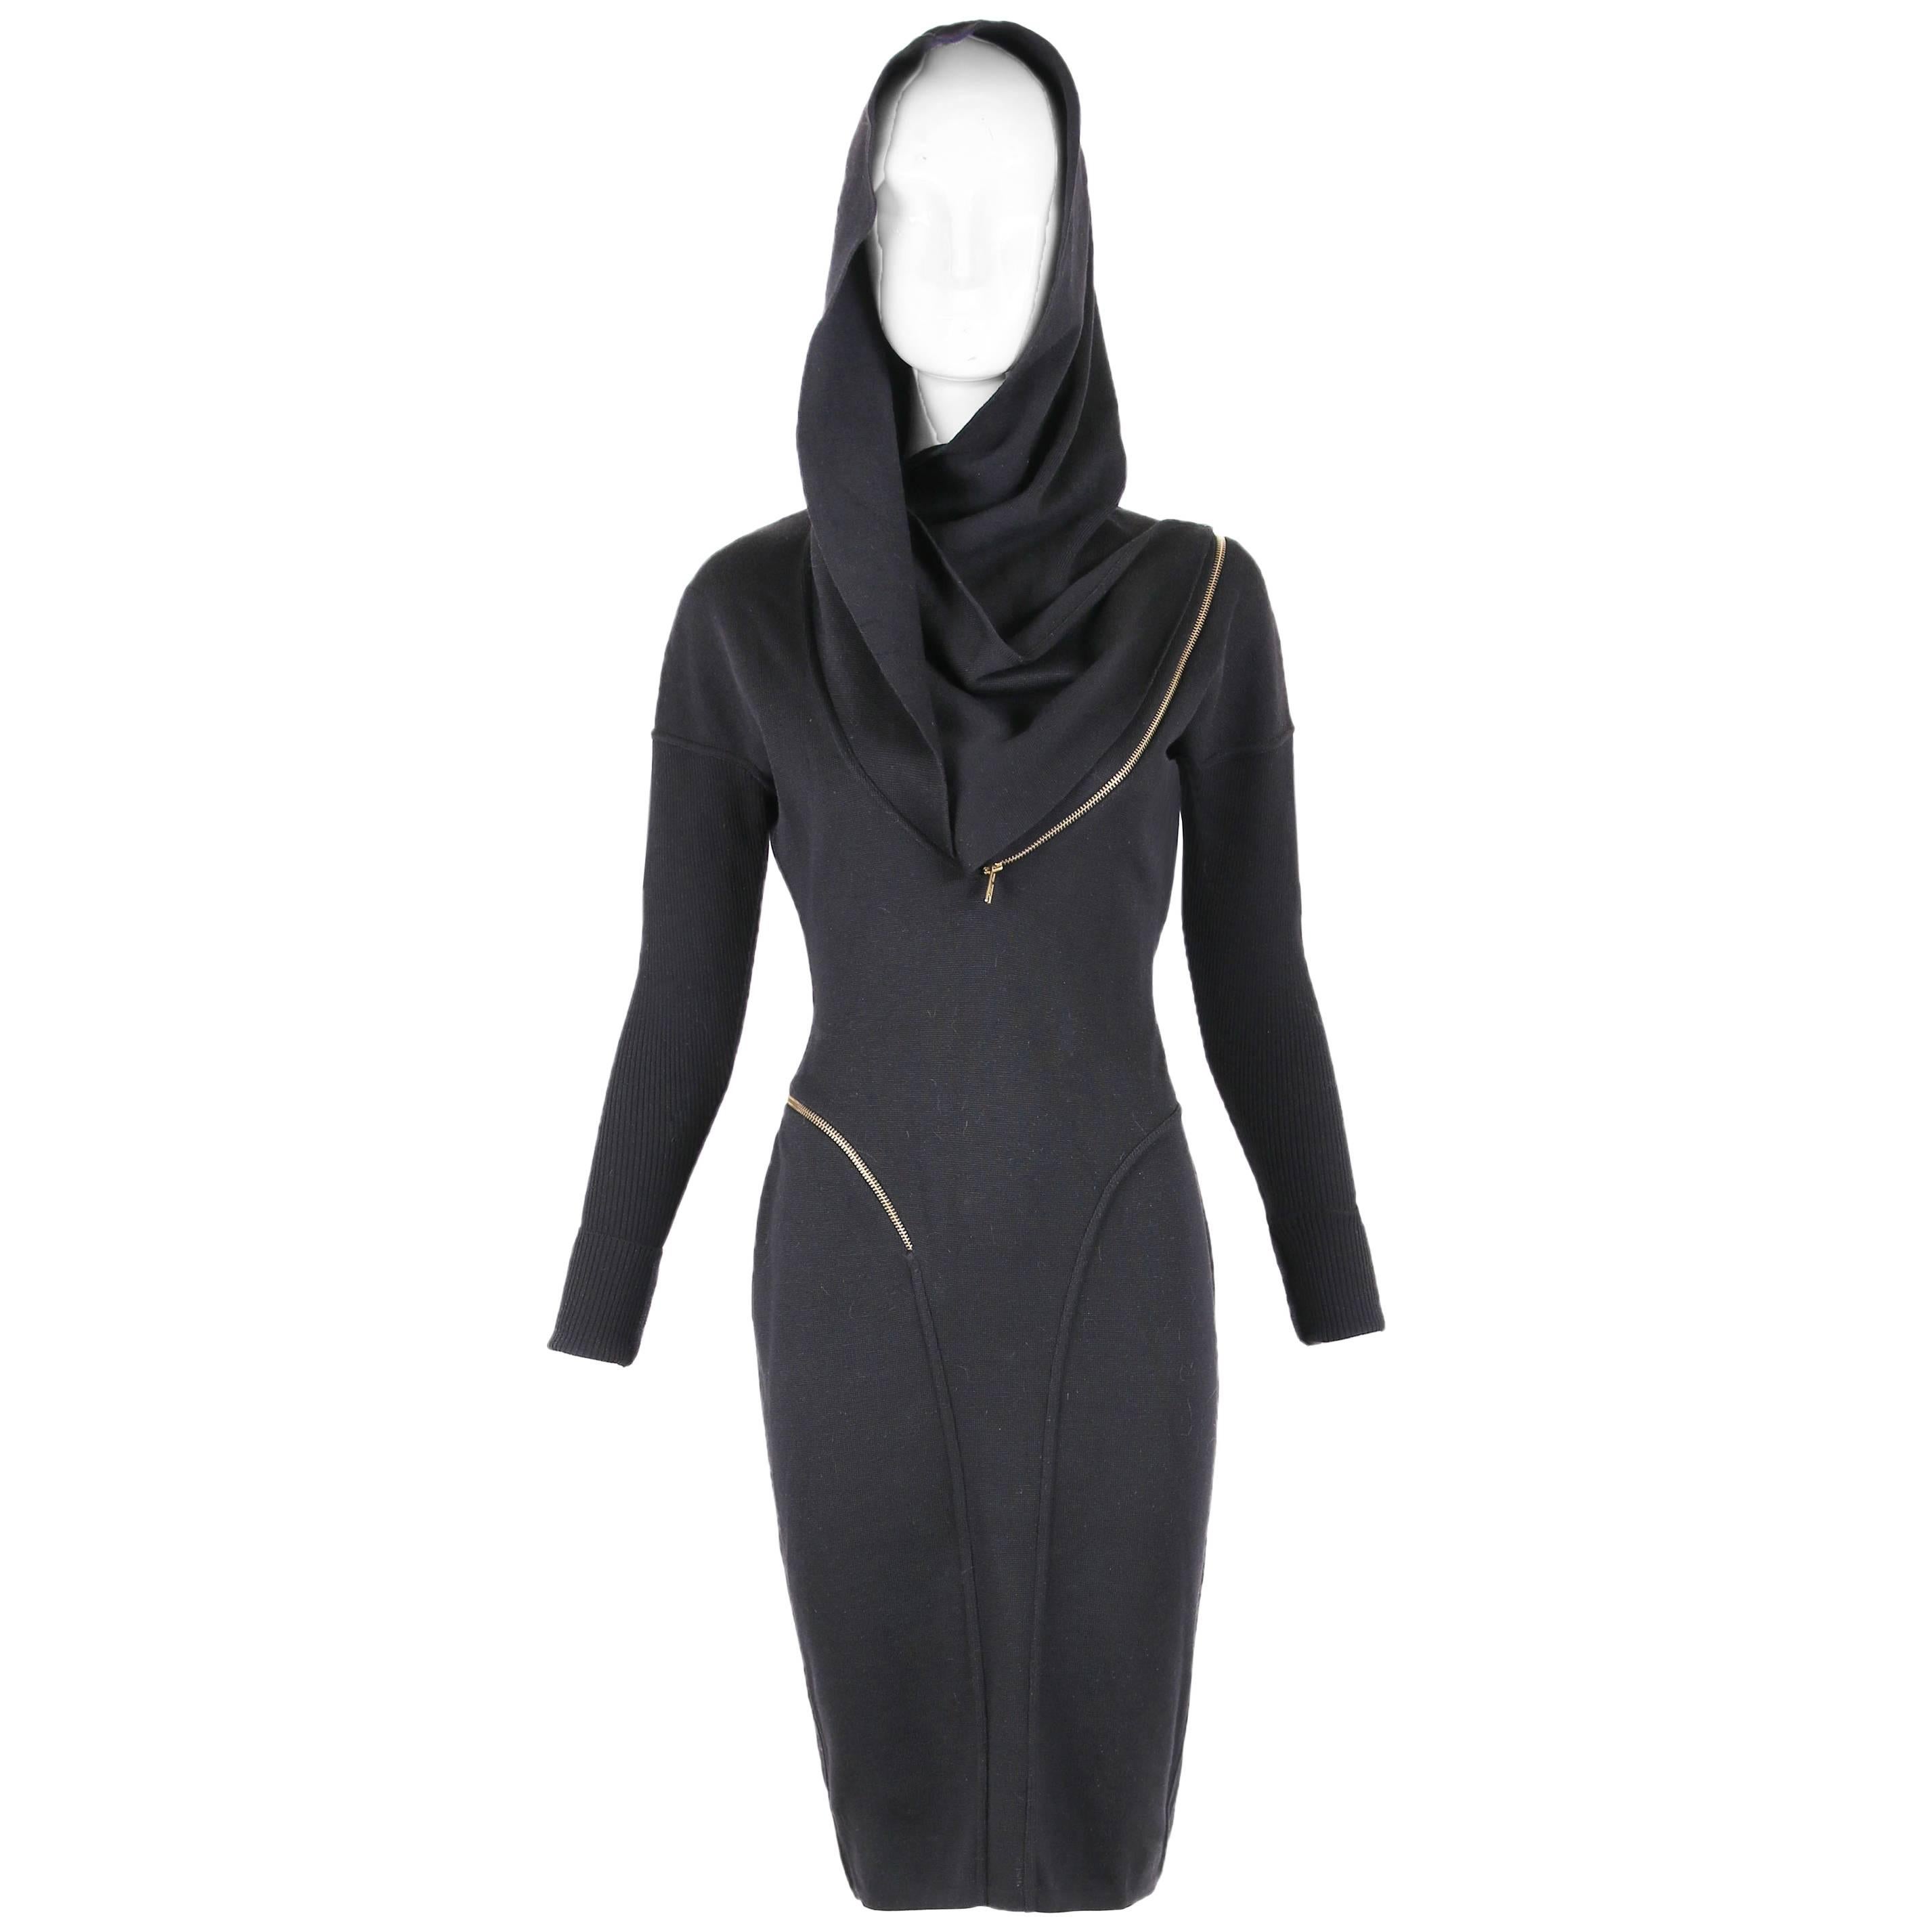 Alaia Museum Quality Black Hooded And Zippered Bodycon Dress, 1986 at ...